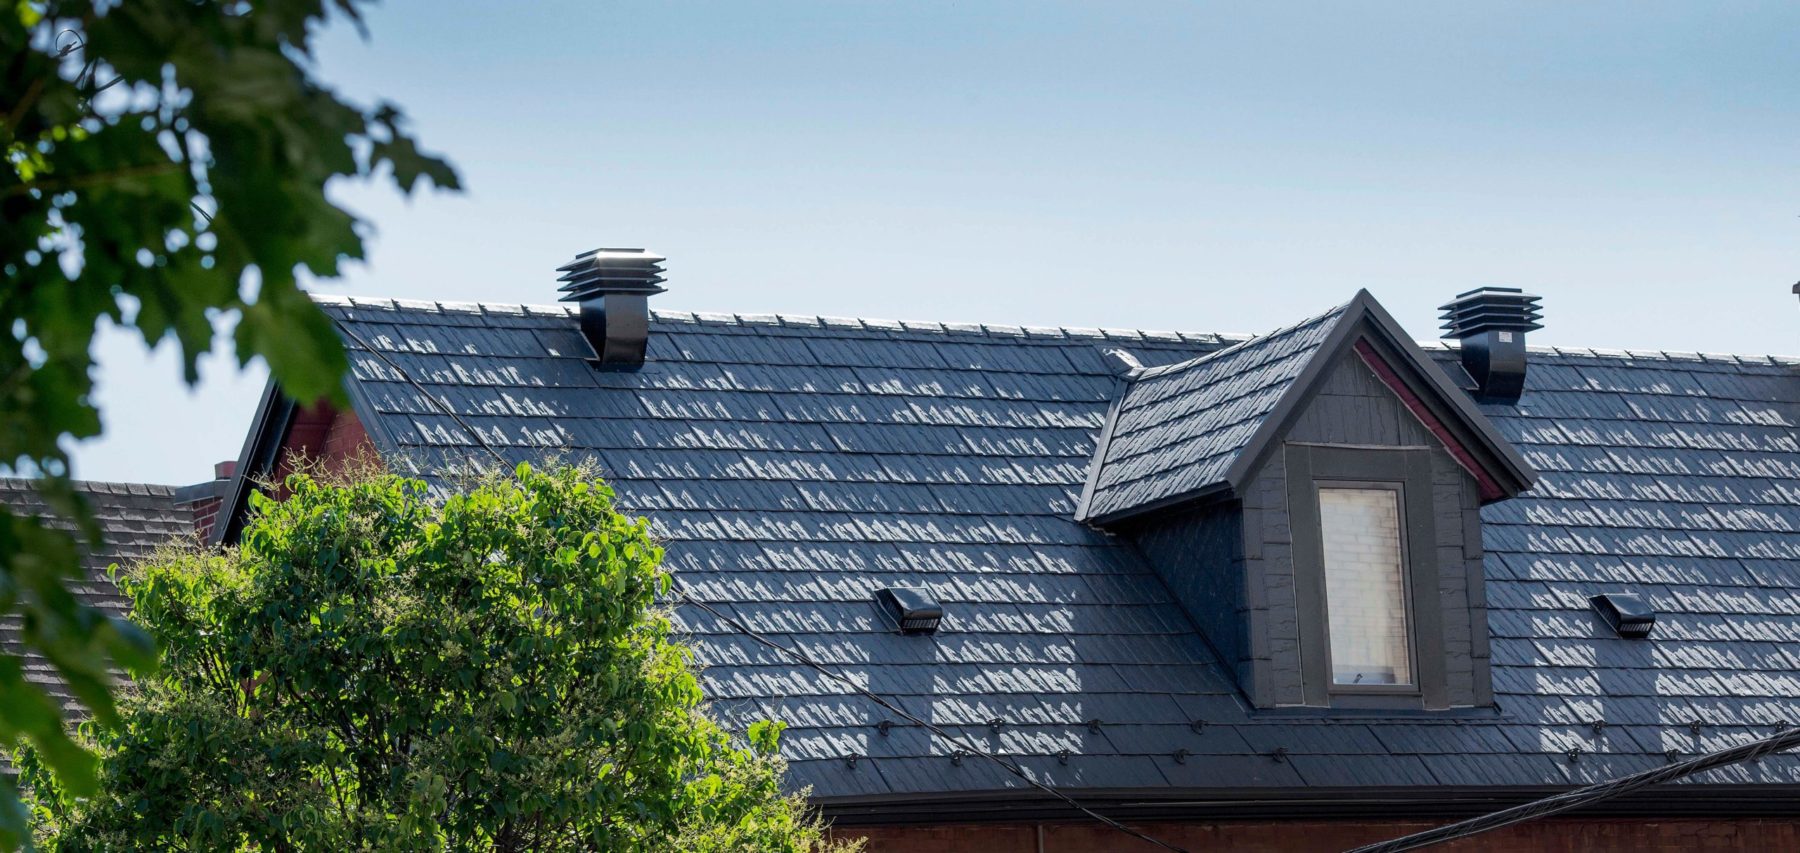 Ottawa Metal Roofing, Home, Roofs of Steel